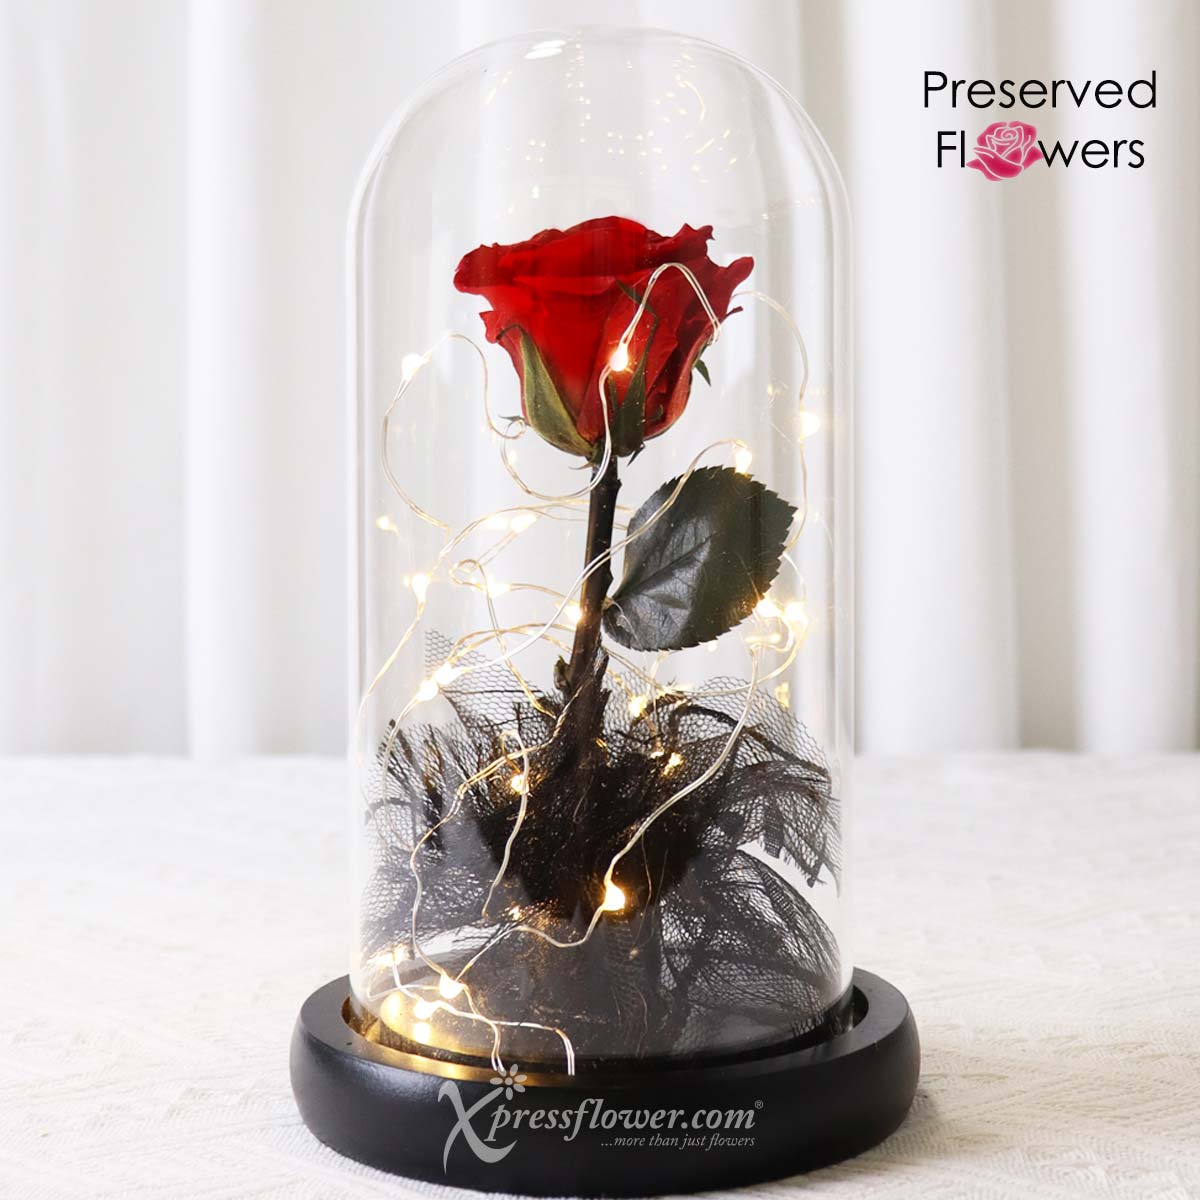 PR2302 Glamourous Rose (Preserved Flowers) 1b